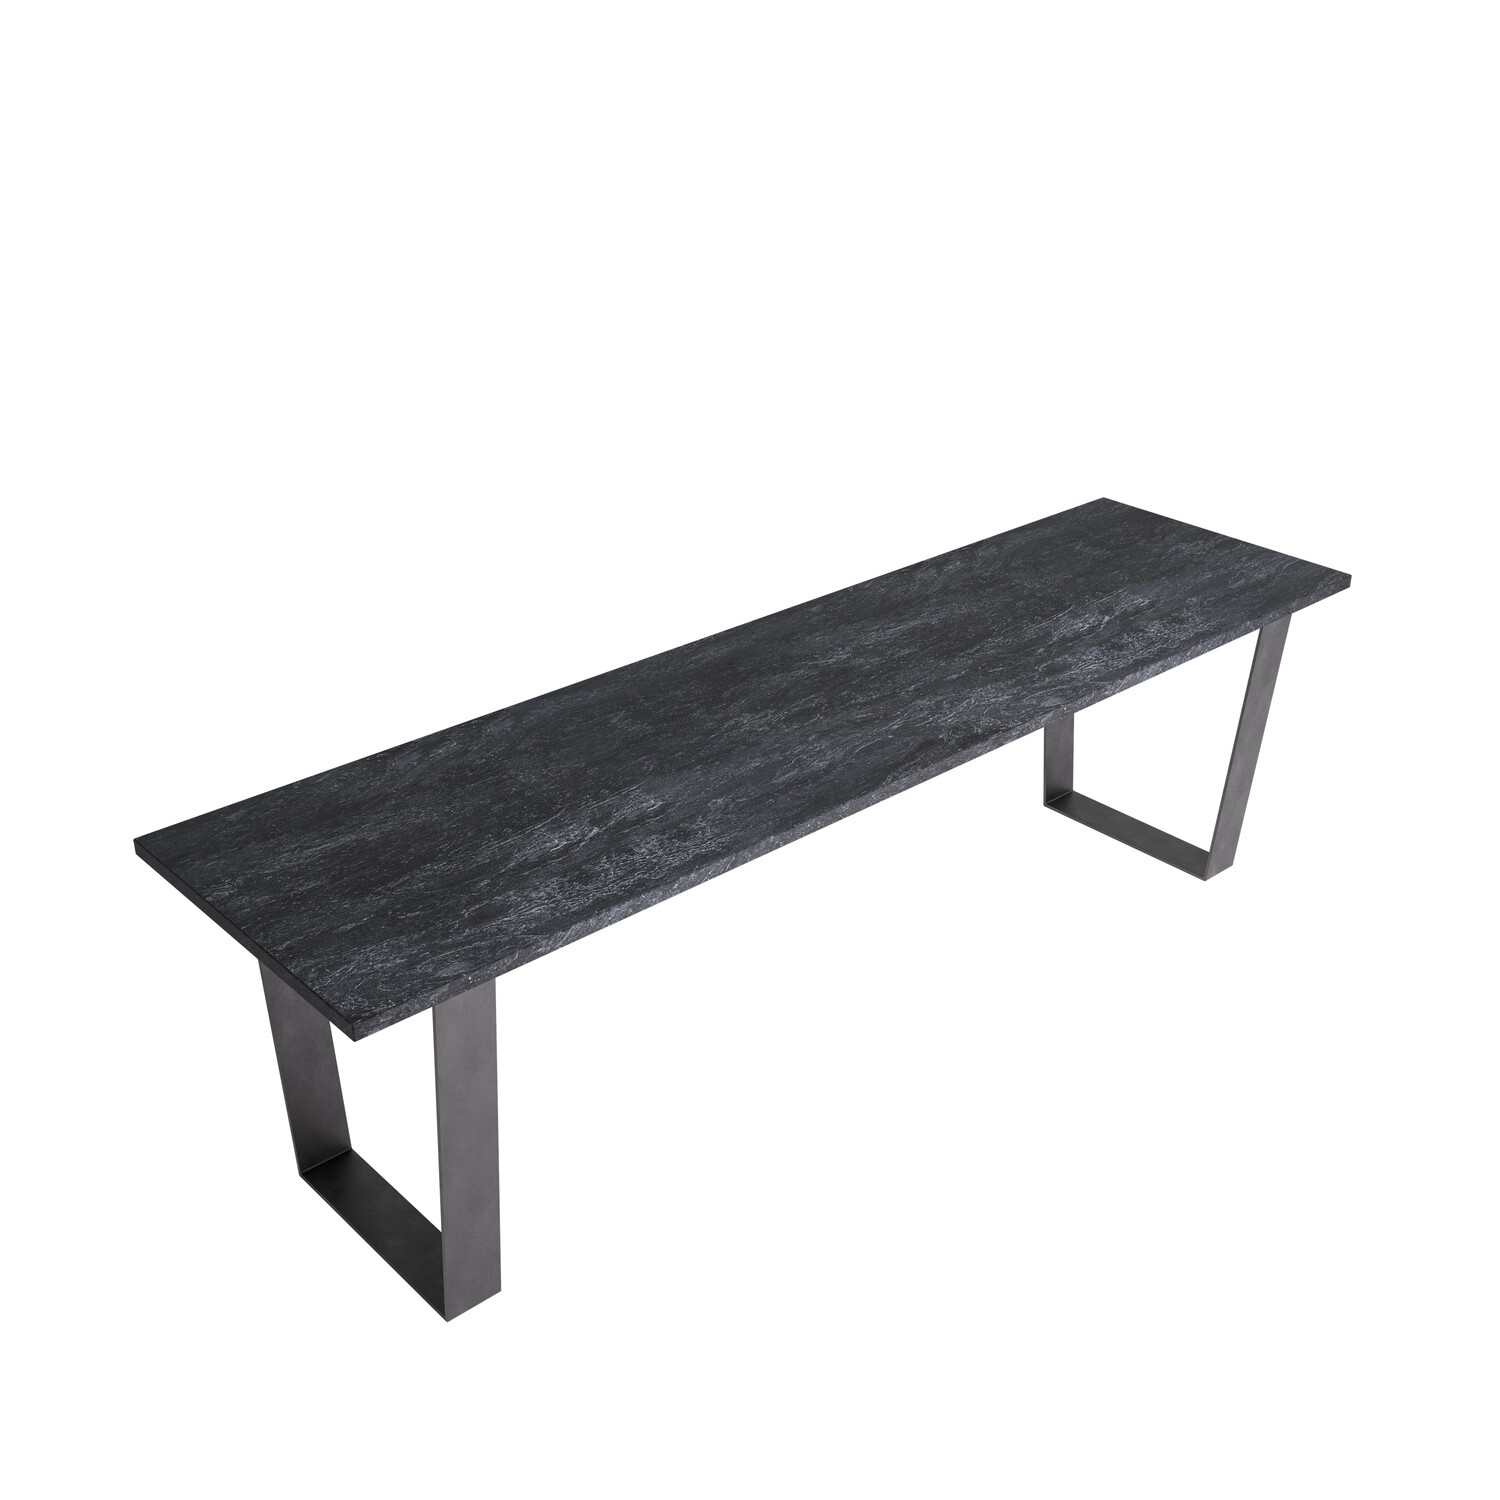 Ivy Anthracite Stone bench